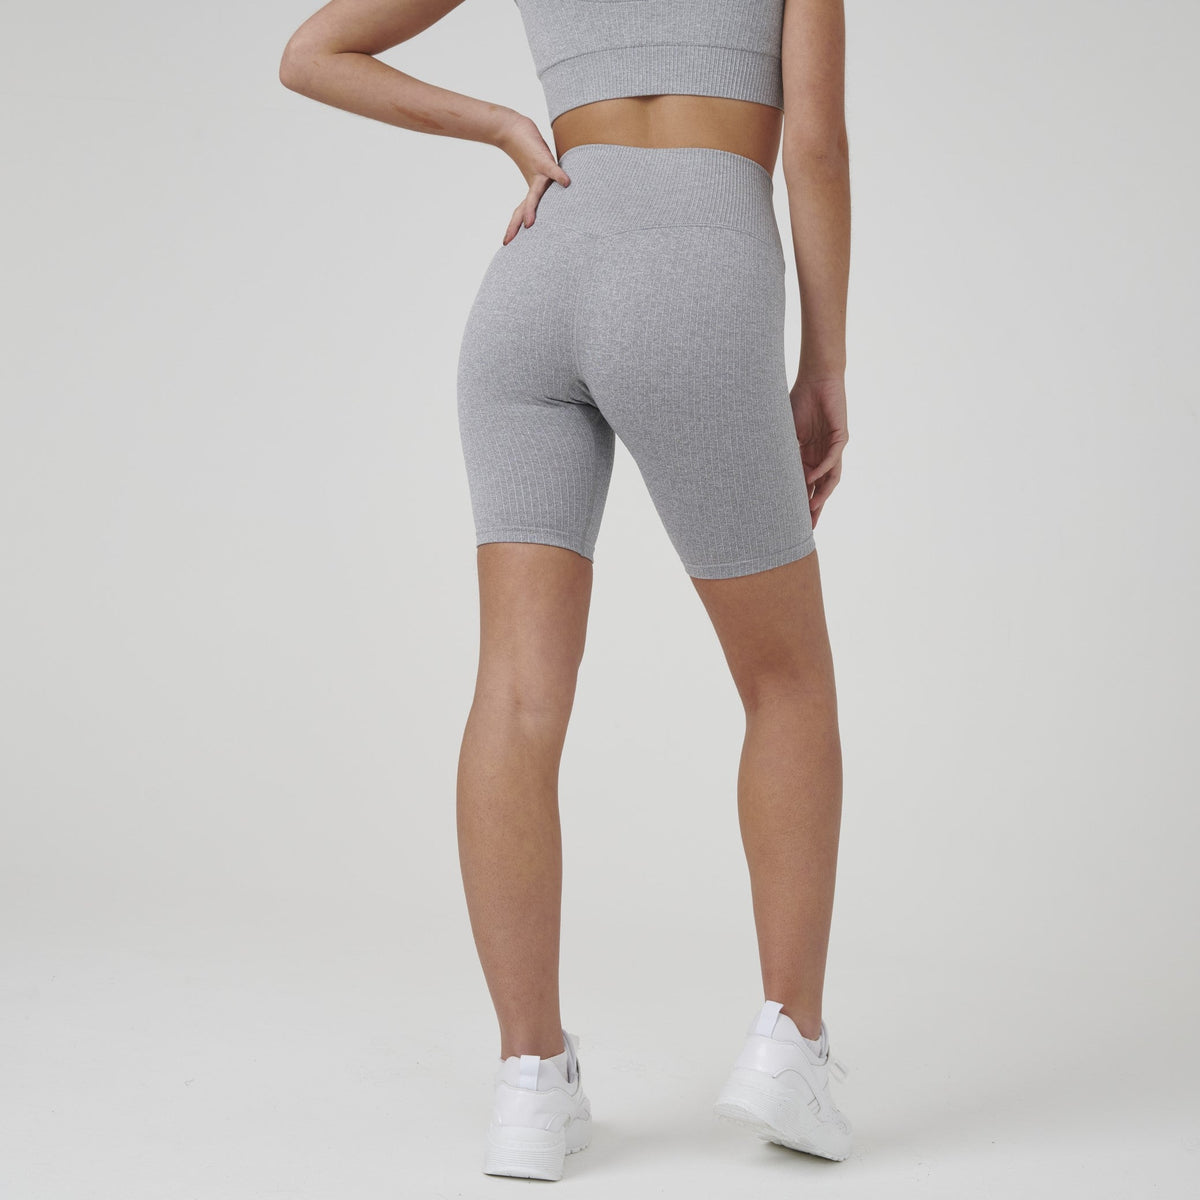 Signature Ribbed Seamless Bike Shorts by Stylish AF Fitness Co